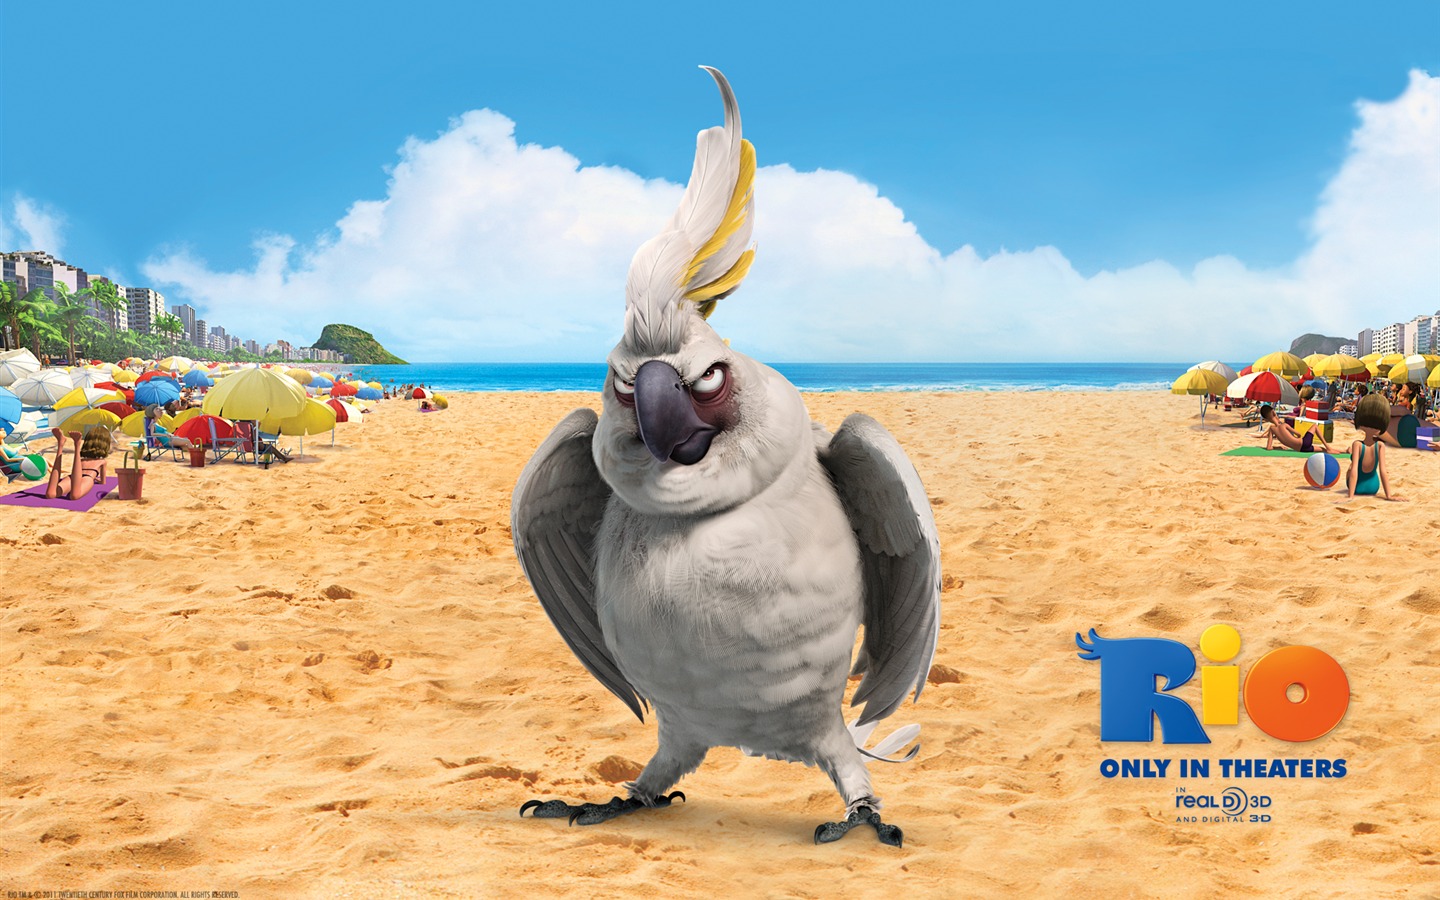 Rio 2011 wallpapers #10 - 1440x900